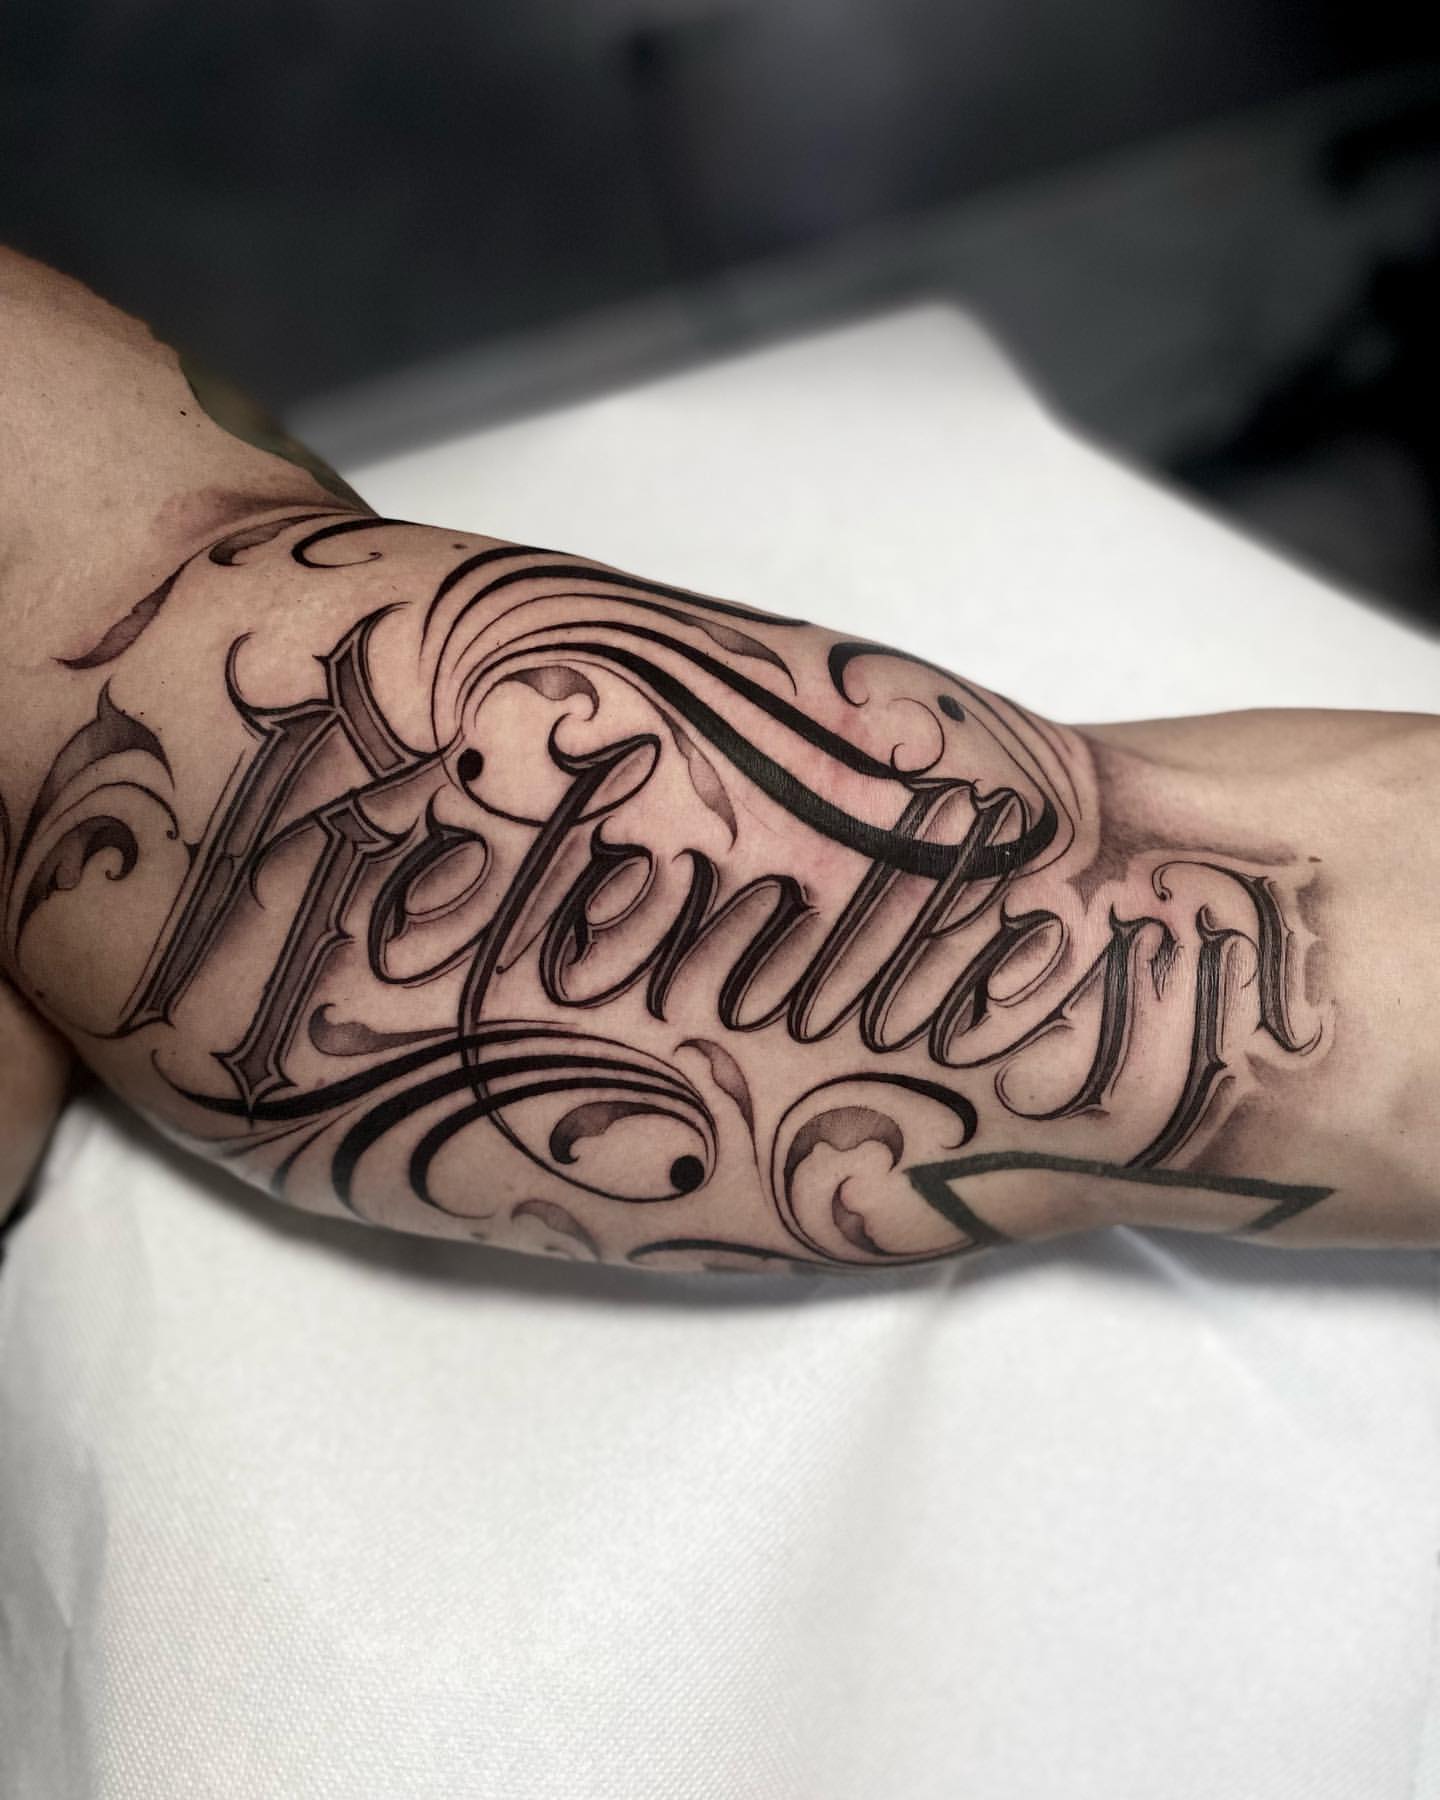 Fresh vs (almost) healed on inner bicep. Done by Merry Morgan at Northgate  Tattoo, Bath UK. : r/bodymods